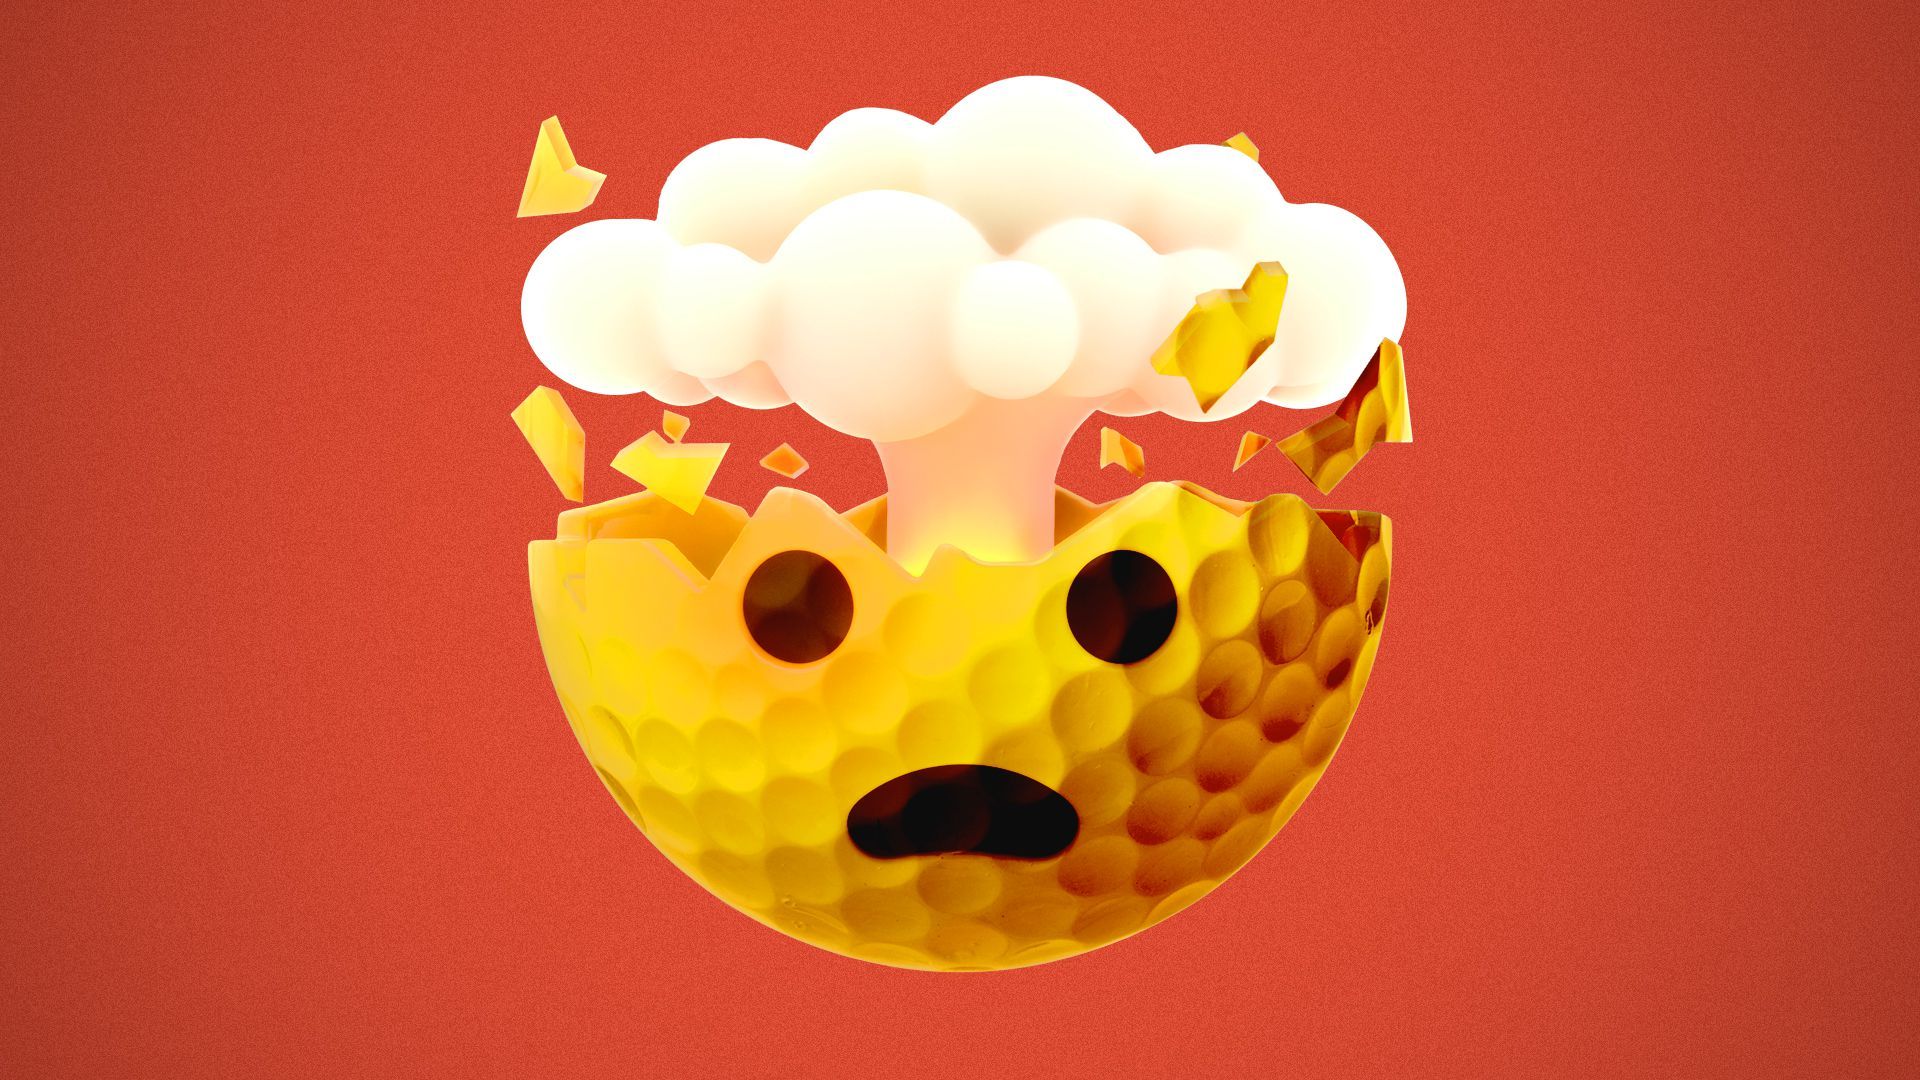 Illustration of the “mind blown” emoji made of a golf ball